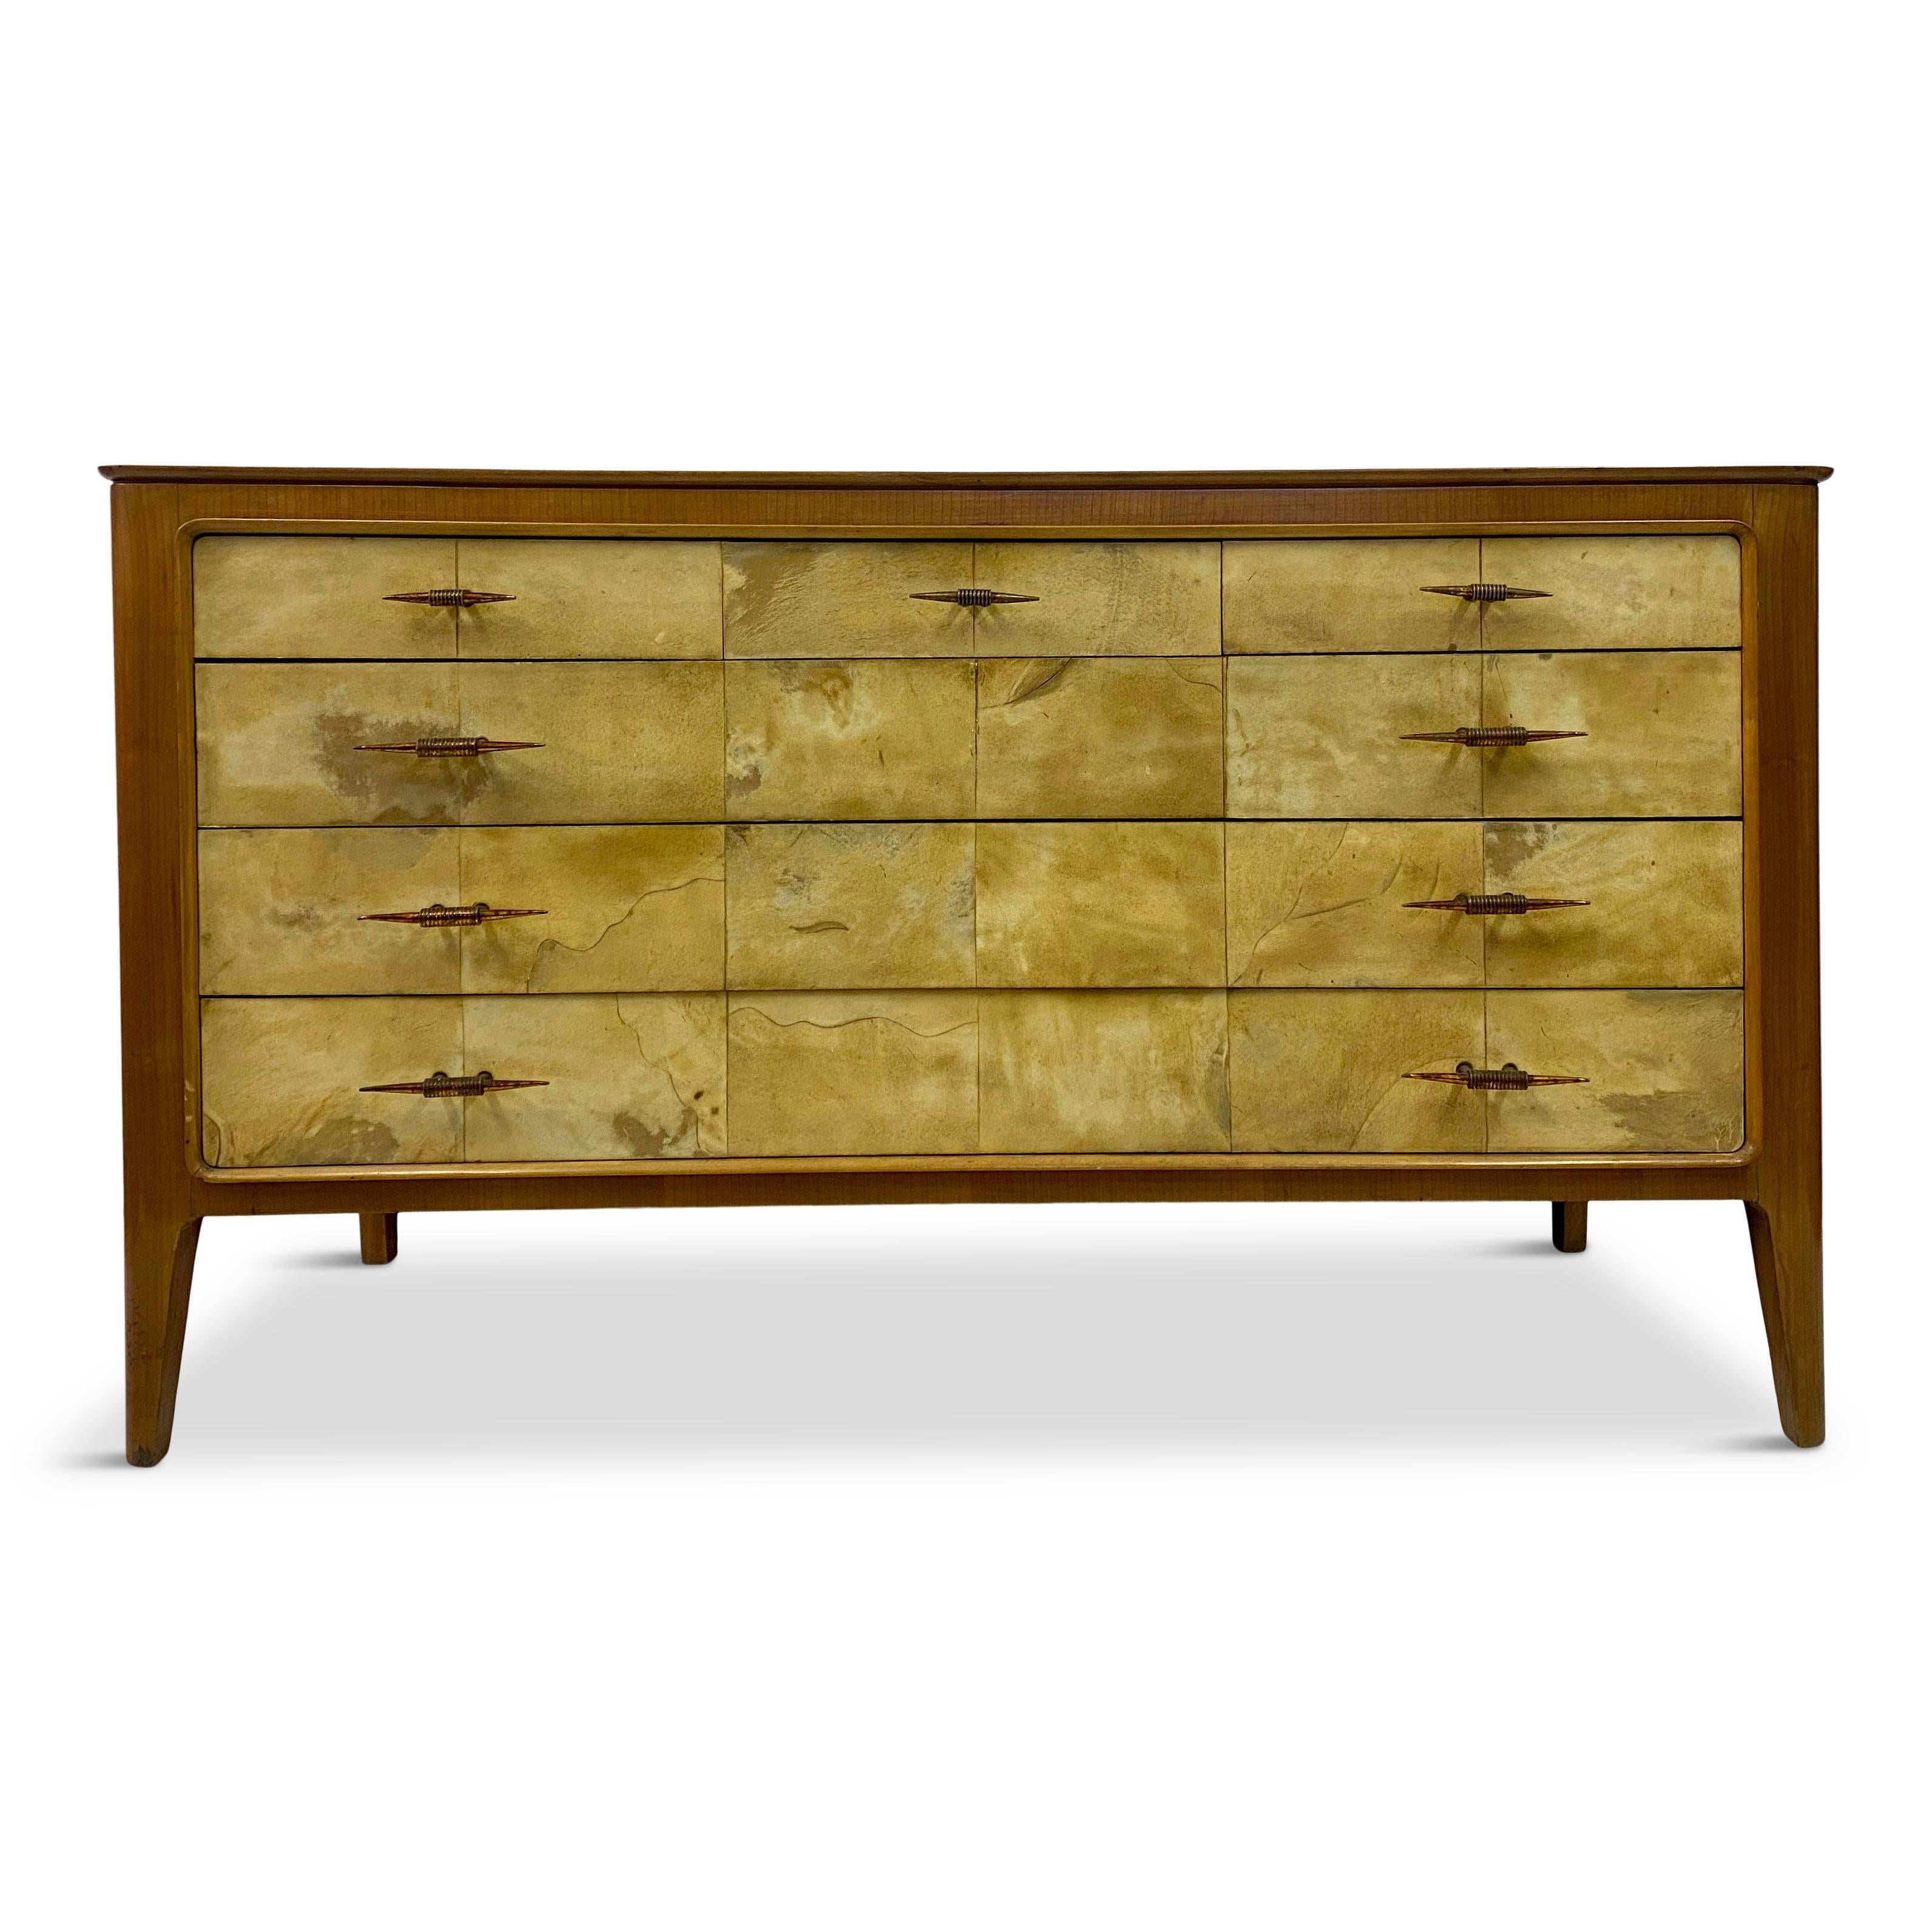 Chest of drawers.

Cherry wood frame.

Parchment fronts.

Brass handles.

Italy 1950s.